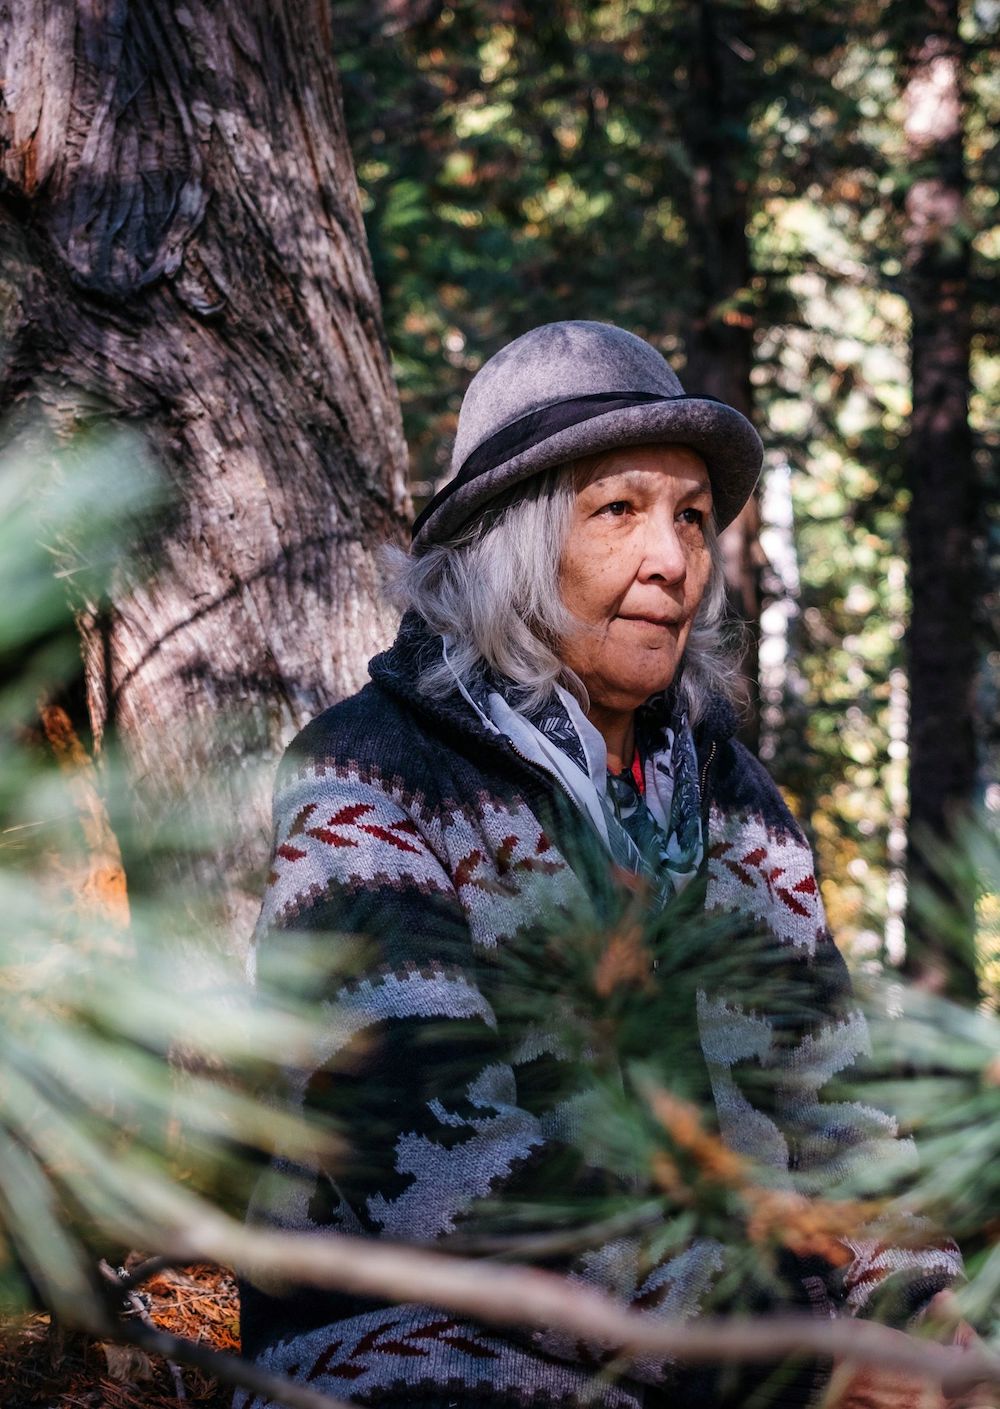 An elderly, grey-haired Indigenous woman wearing a round-brimmed hat and a sweater with an Indigenous geometric pattern stands next to a tree and looks to the right.